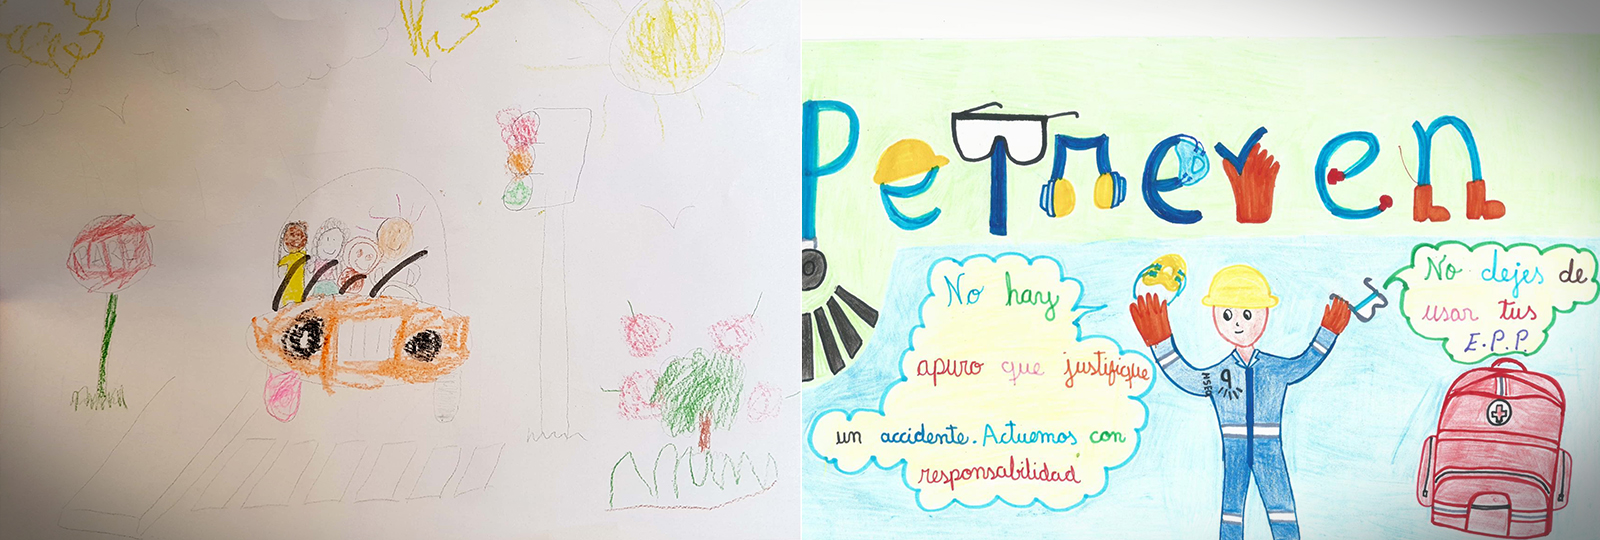 <p>CHILDREN'S DRAWING COMPETITION</p>
